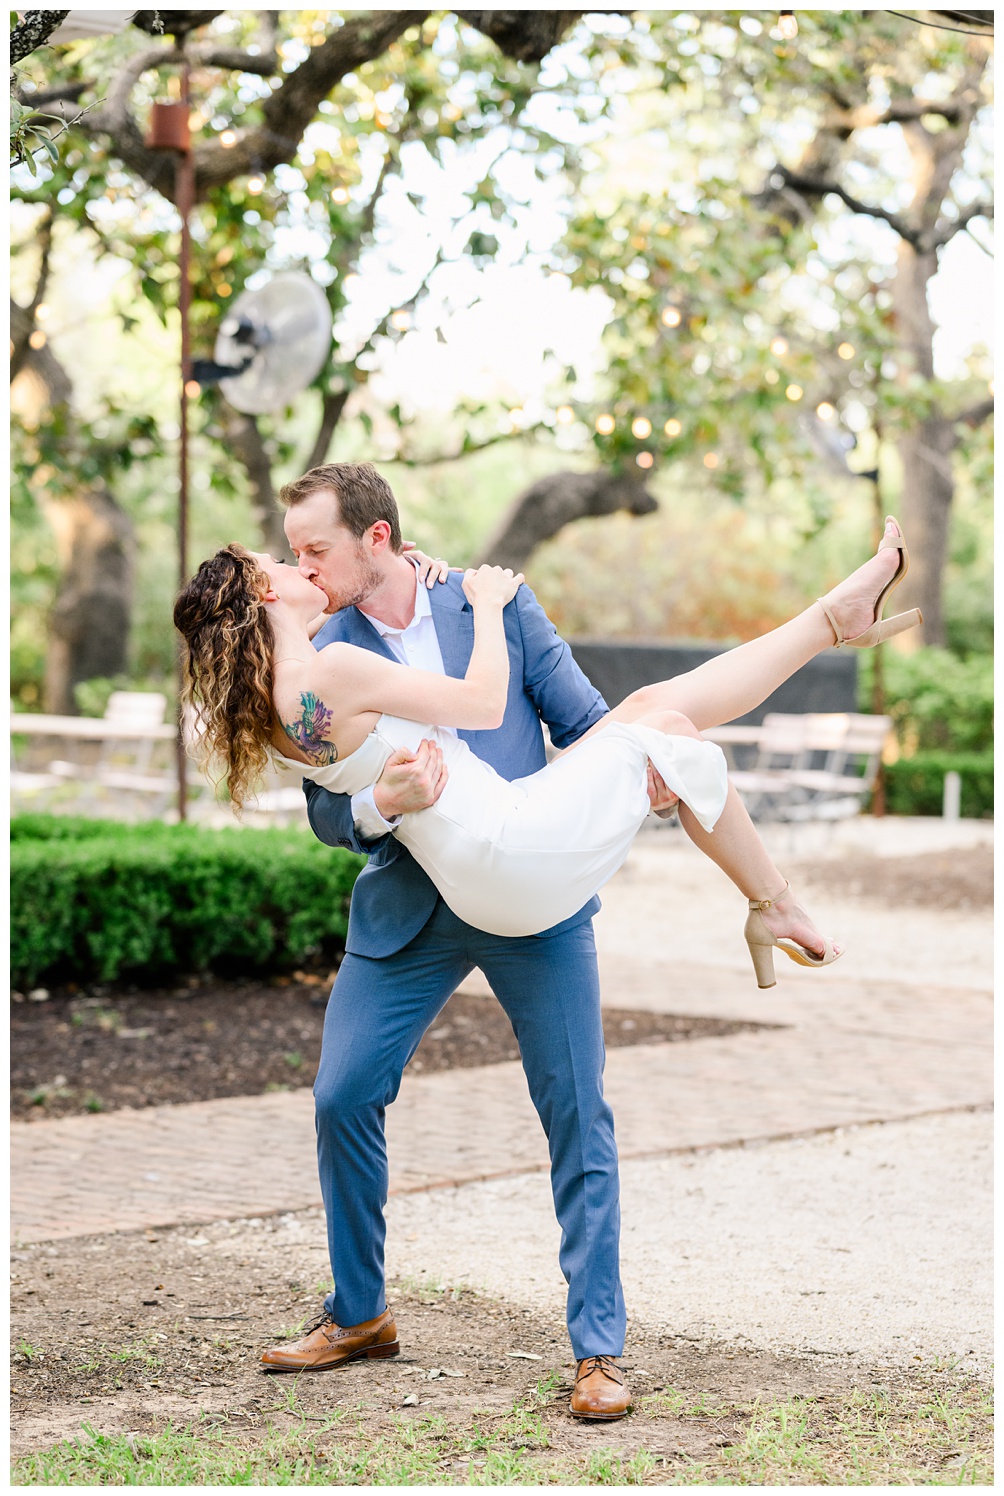 Groom sweeps bride off her feet at Mattie's in Austin, the perfect location for elopements and small weddings